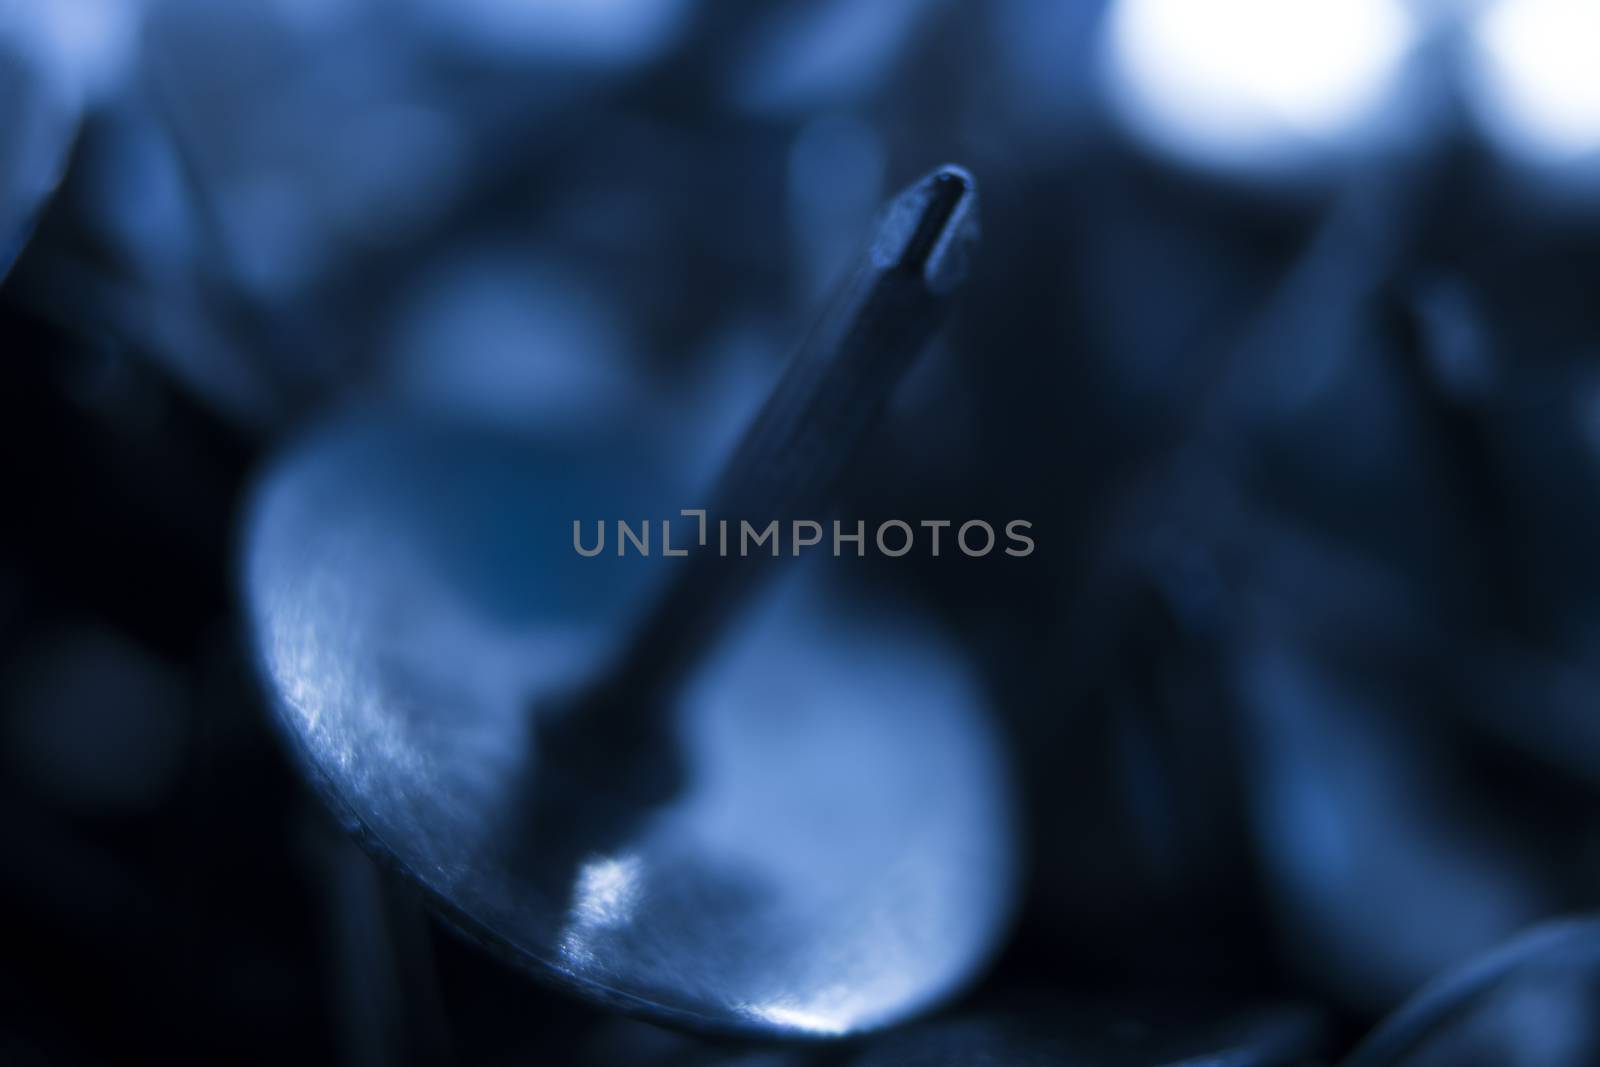 Umbrella Head Roofing Nails Close Up Macro by vector1st